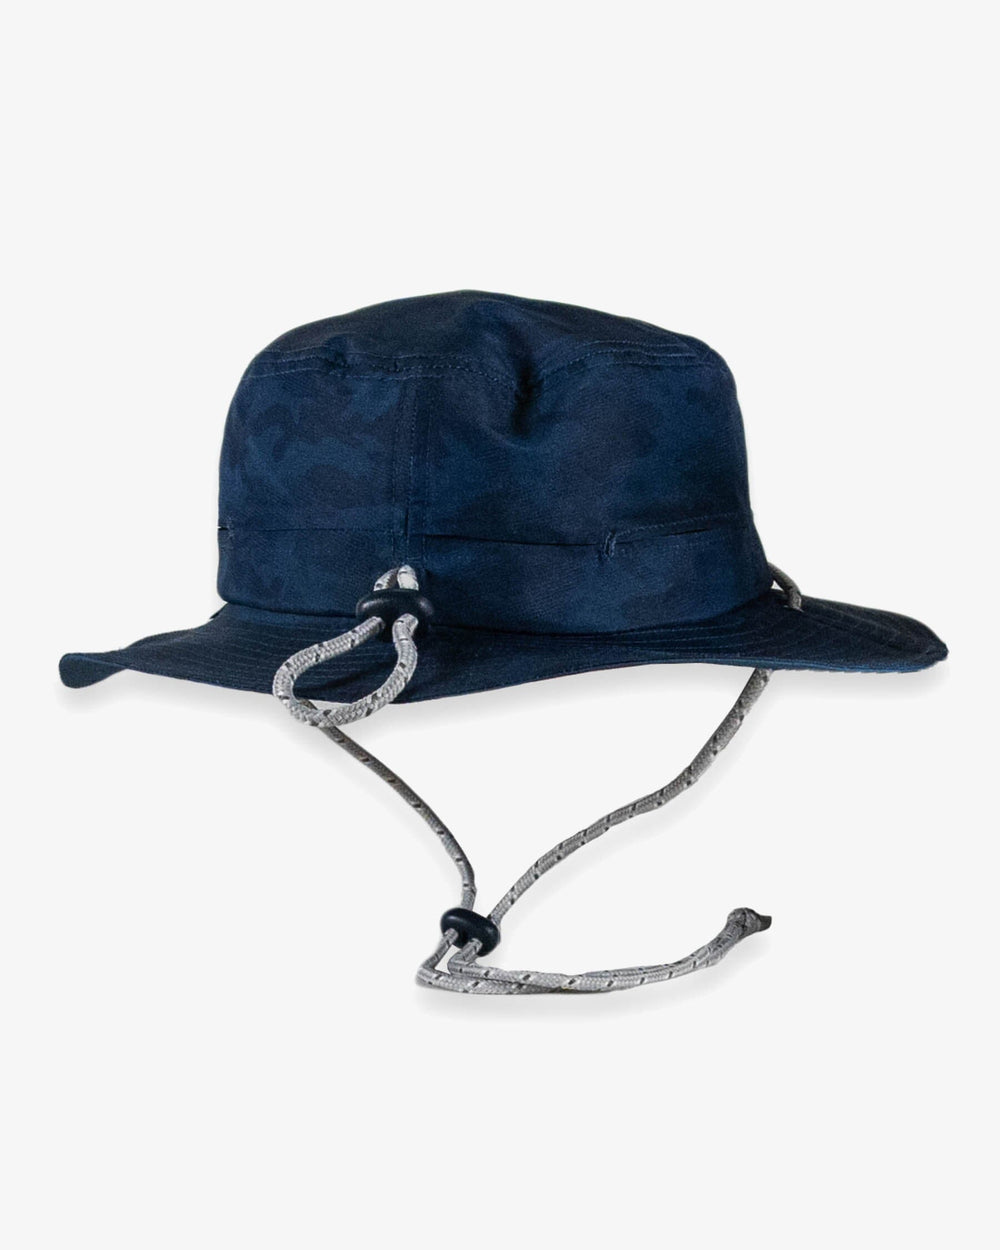 Mission Cooling Bucket Hat Review (2024) - SAIL